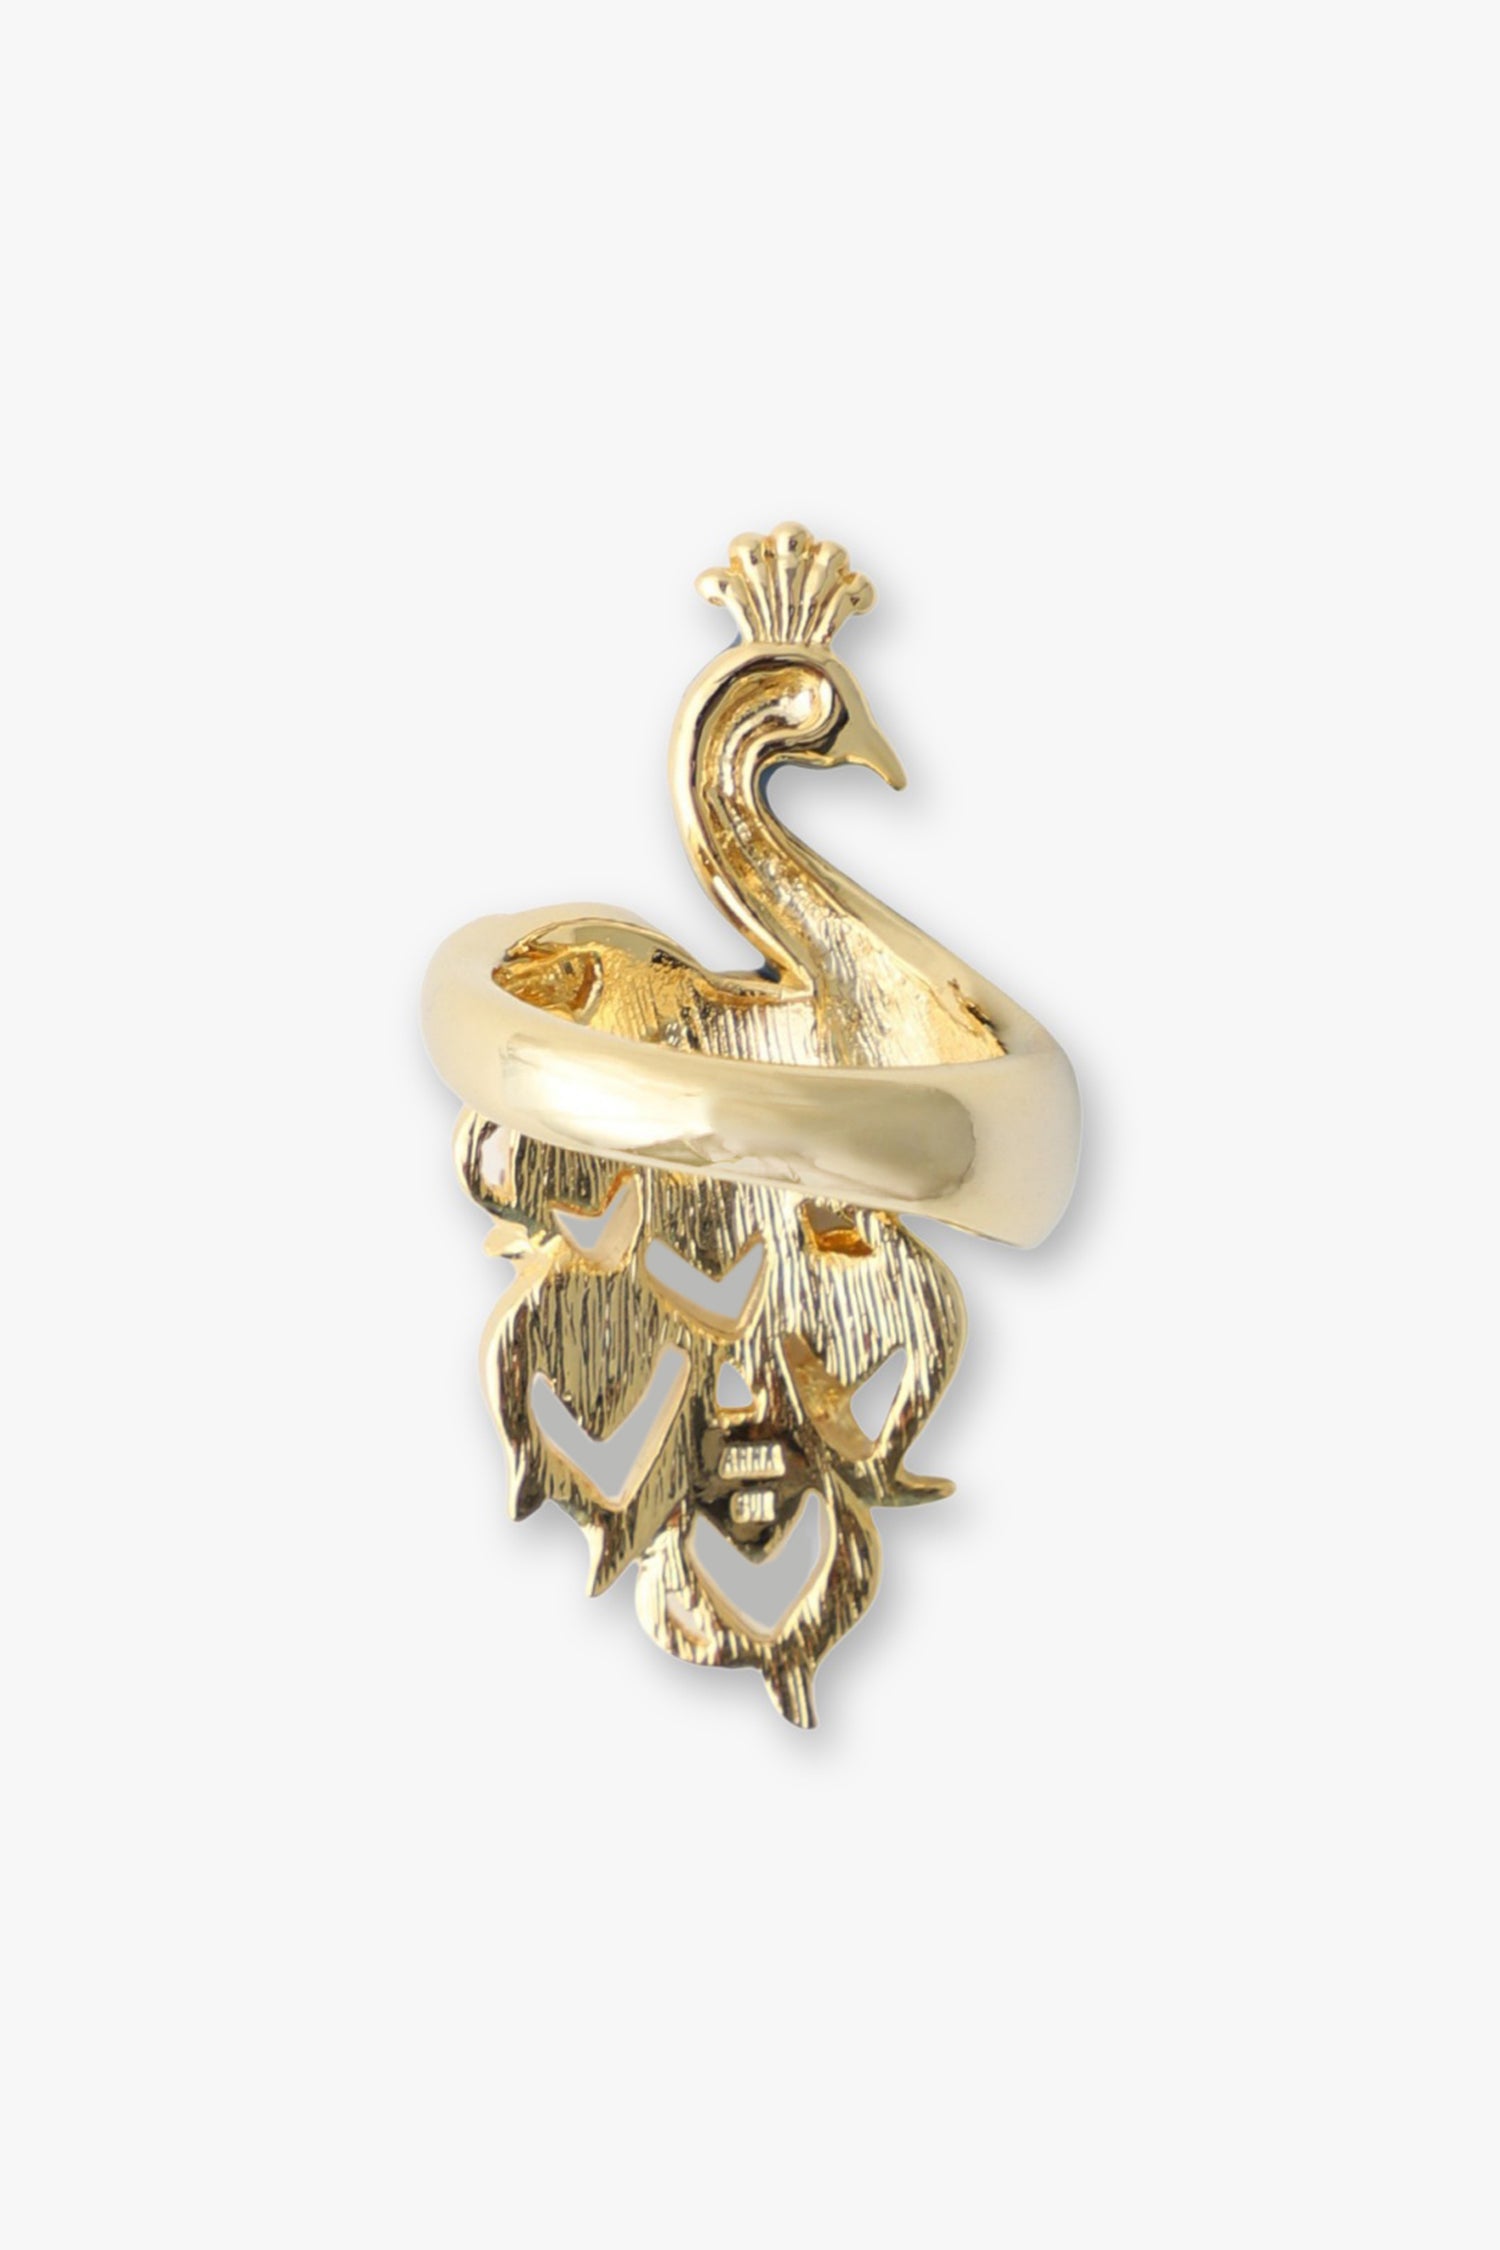 Peacock Ring, the ring is in one piece of golden metal, Anna Sui label is on the back of the wings